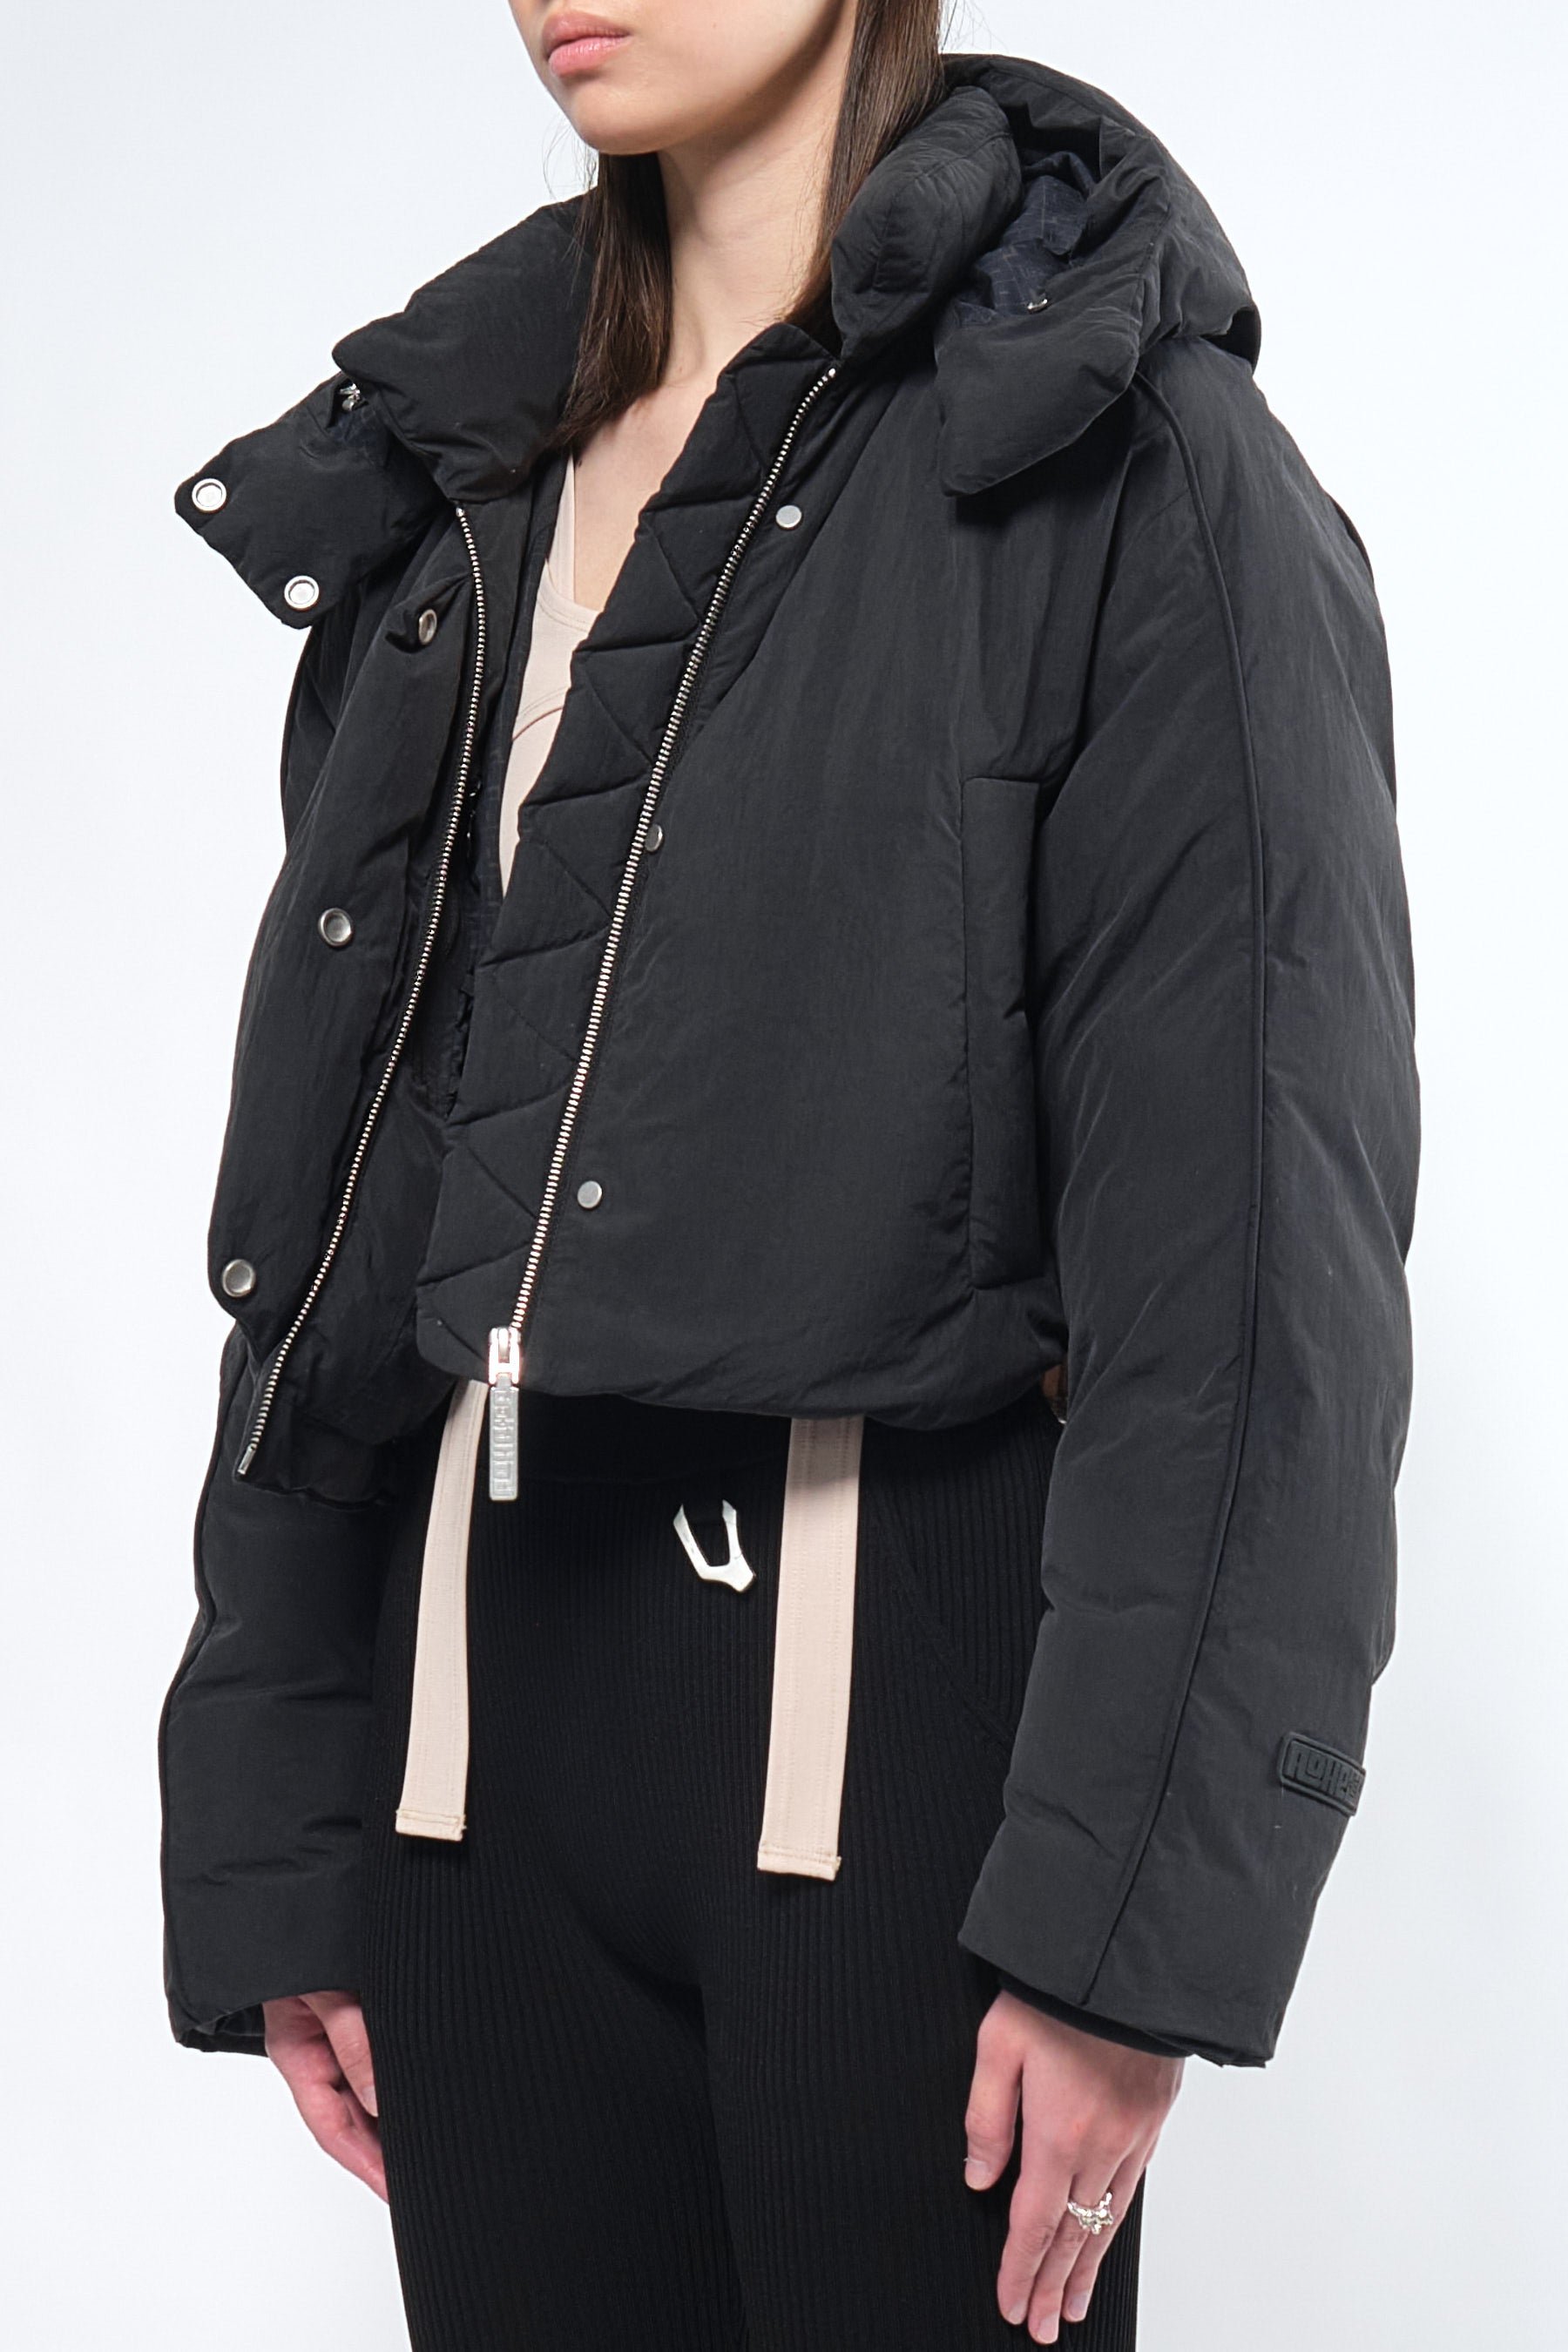  Re:Down® Crop Black Puffer Jacket with Hood - Adhere To  - 10